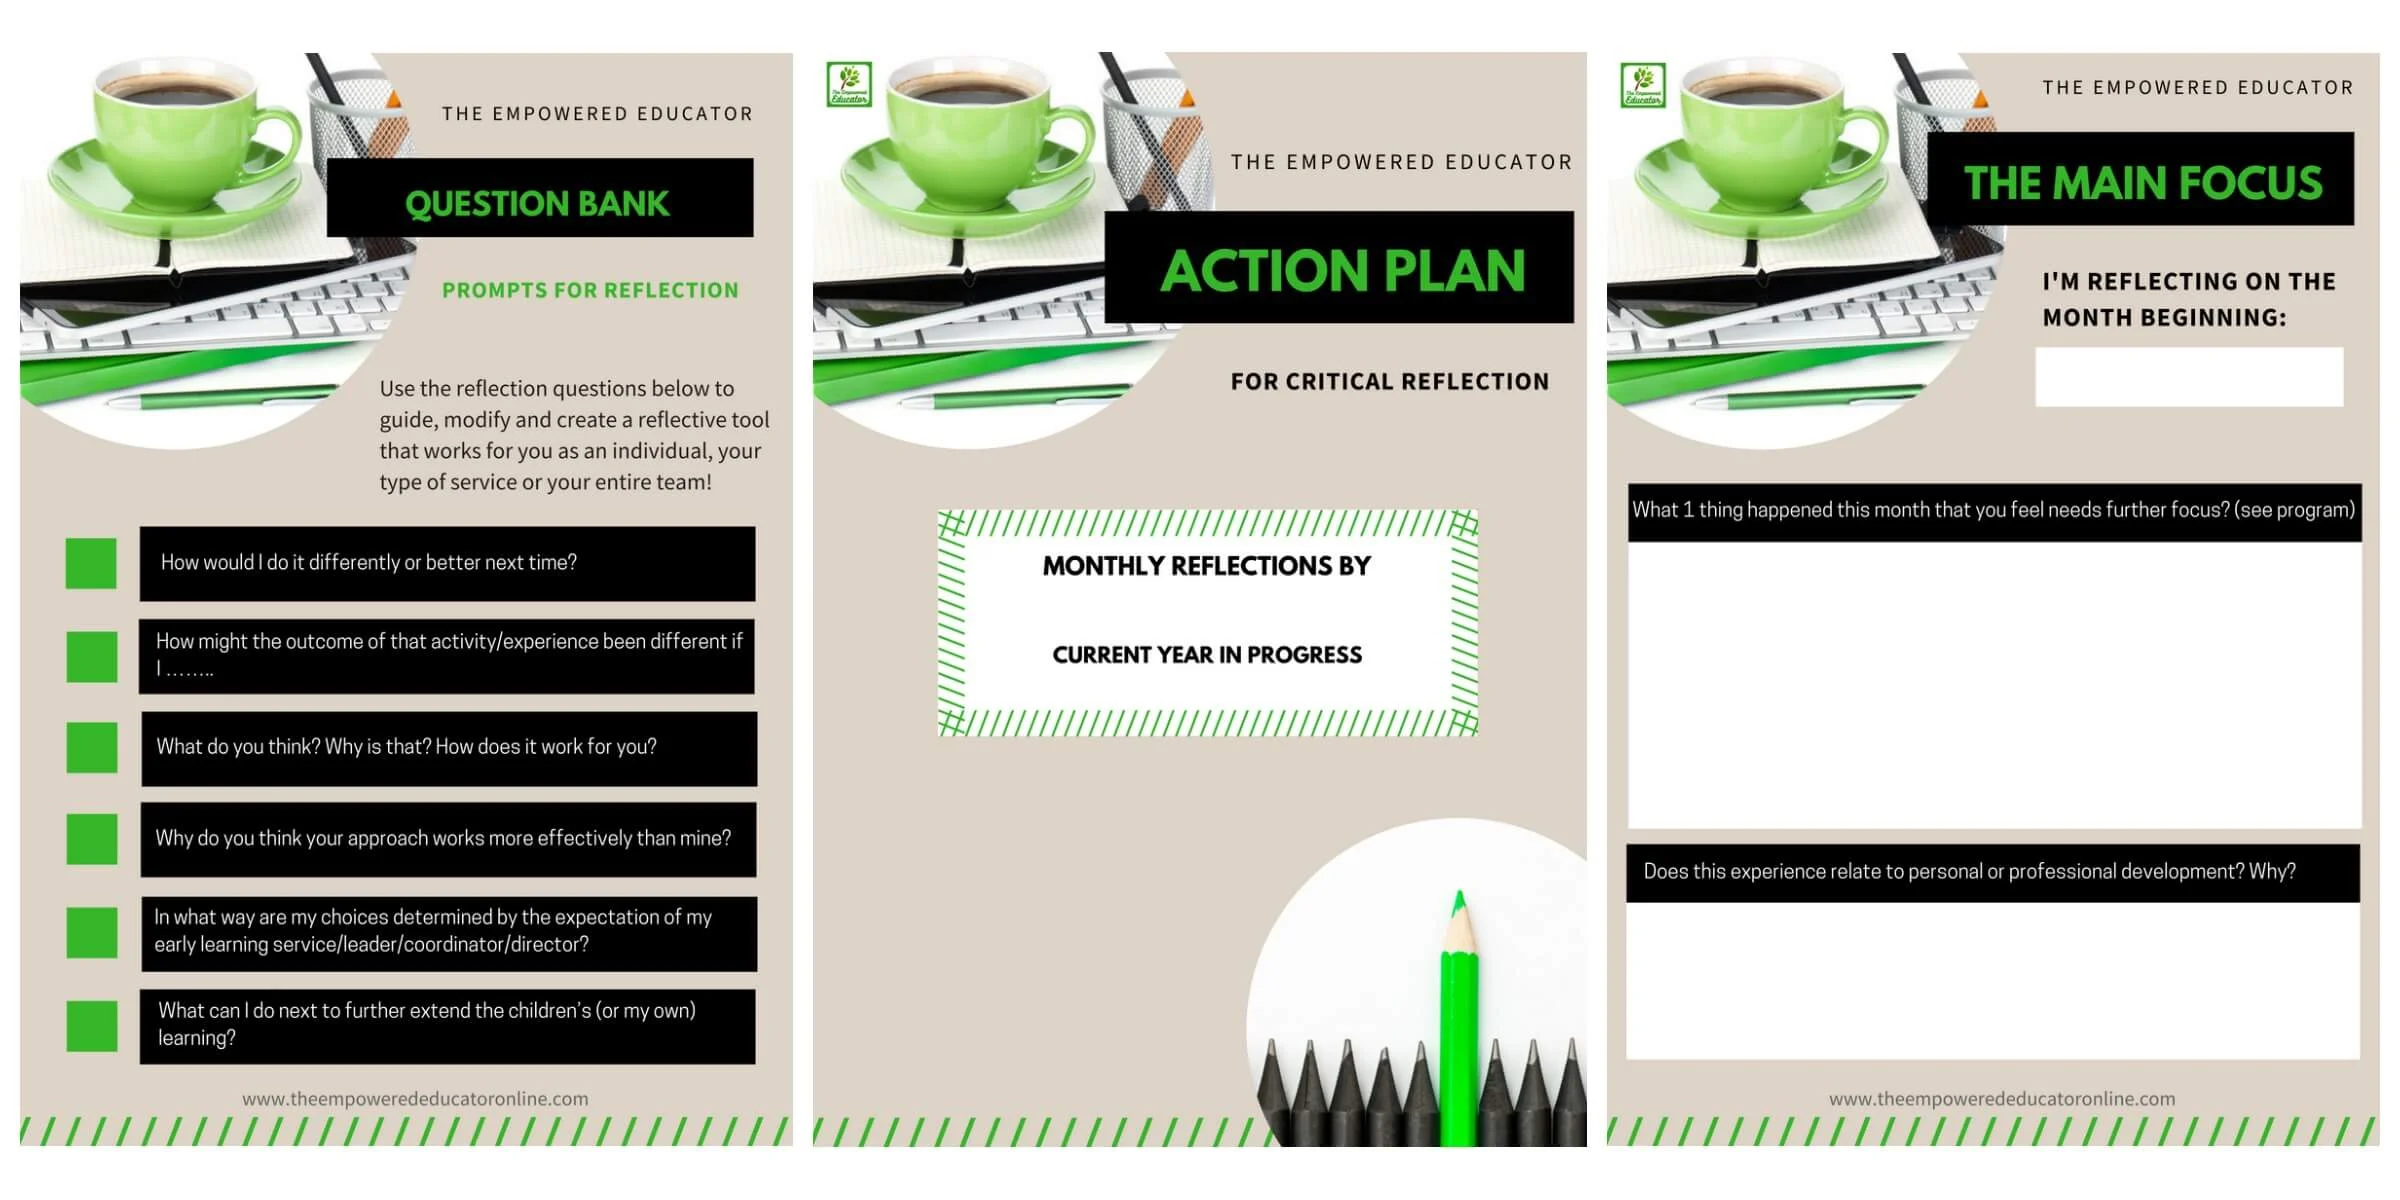 Stop overthinking critical reflection and just get started using these simple explanations, tips, question prompts and free action guide download!